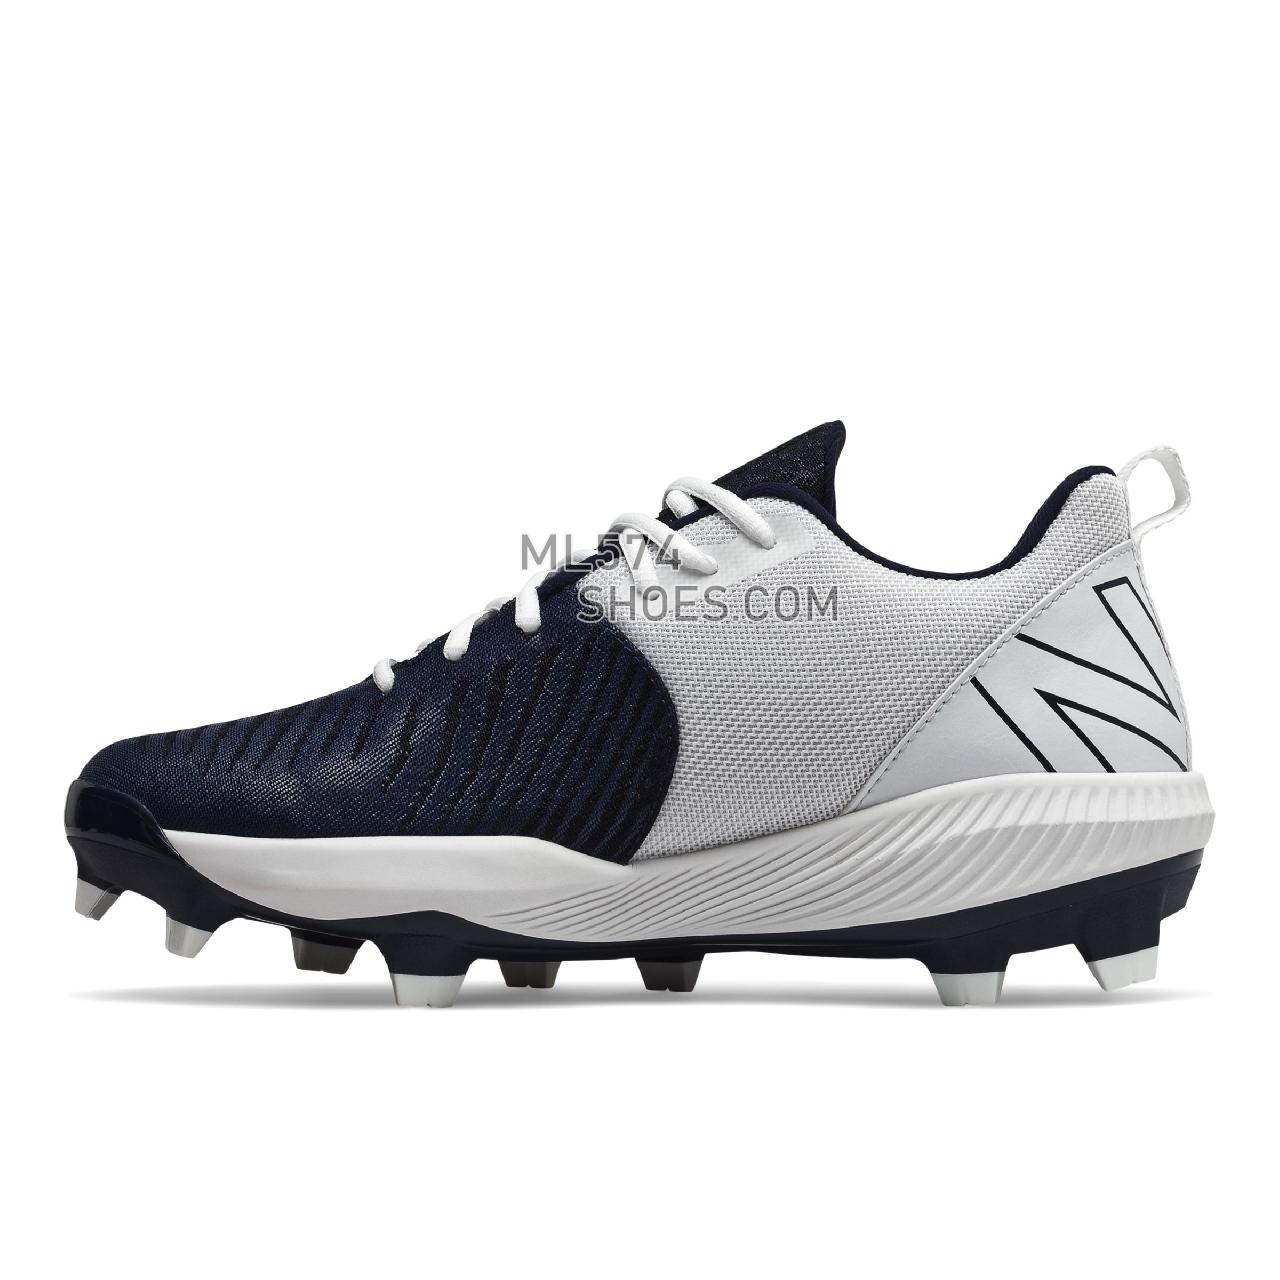 New Balance FuelCell 4040 v6 Molded - Men's Mid-Cut Baseball Cleats - Team Navy with White - PL4040N6